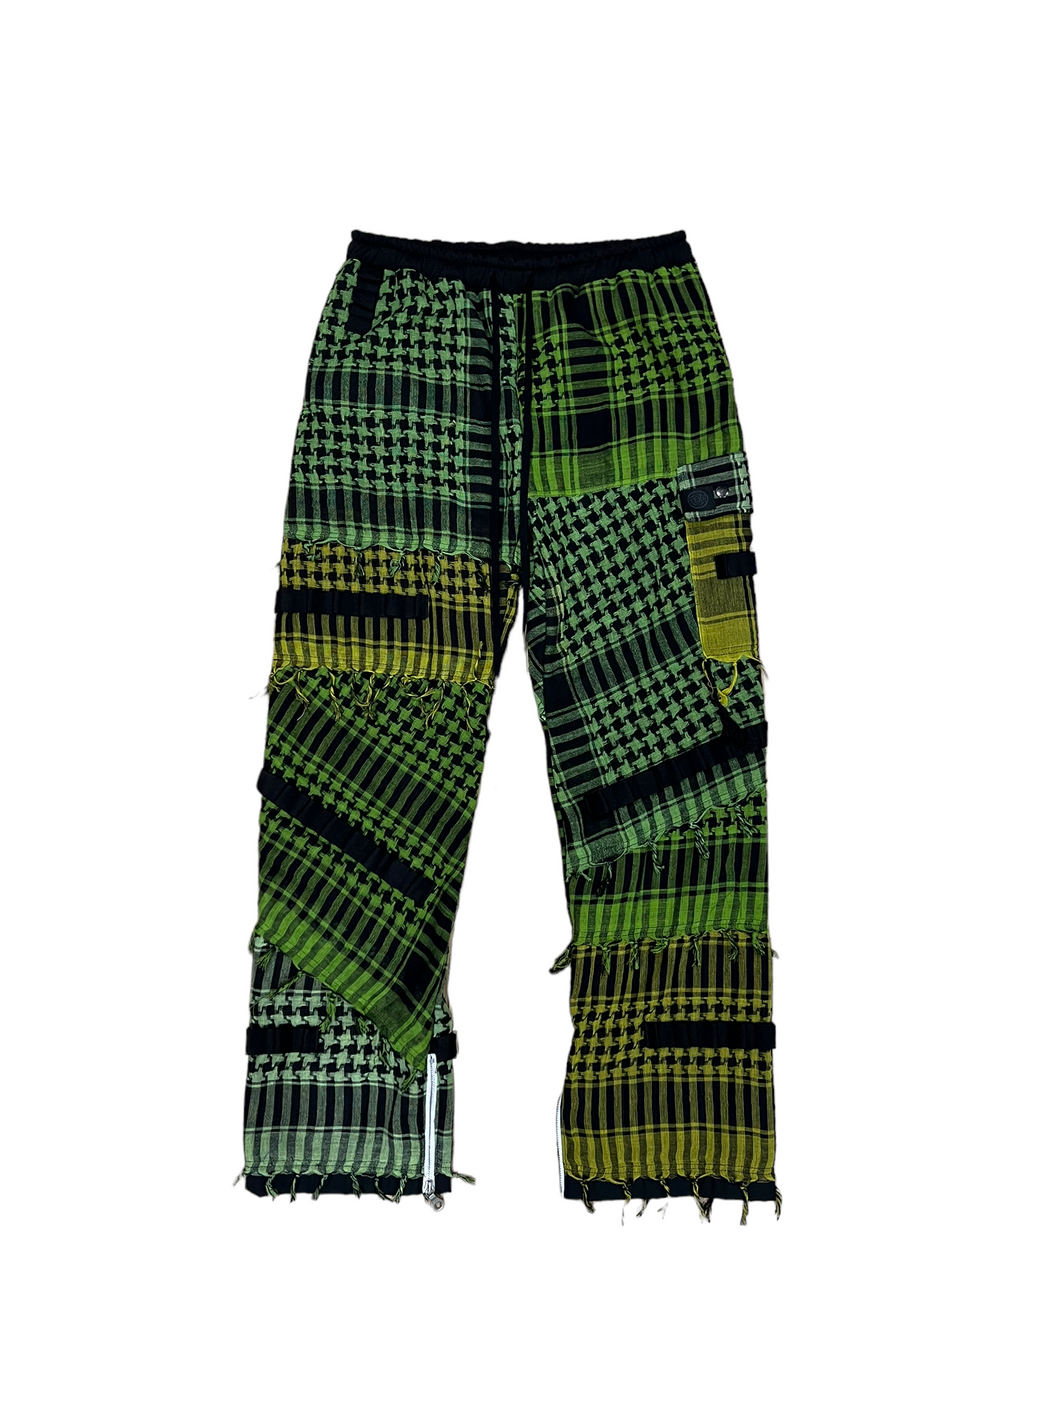 1 of 1 GREEN SHADES PATCHWORK PANTS (M/L 32-36” waist)